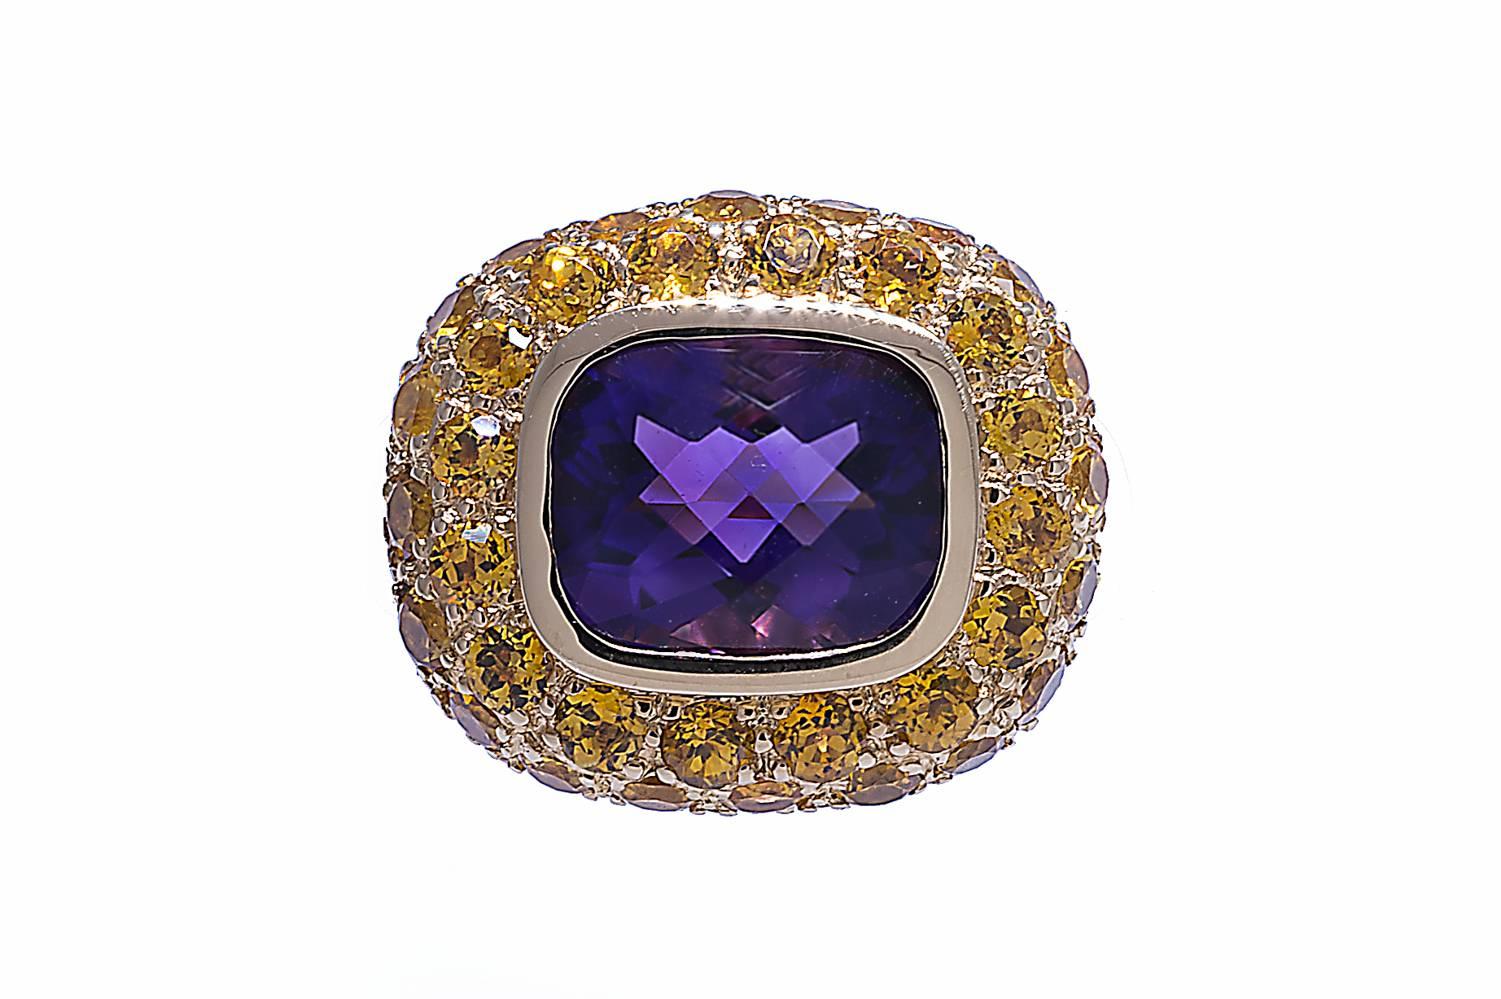 18K yellow gold ring contains a 2.74 carats cushion shape checkerboard cut amethyst. The amethyst is bezel set. The ring also contains 3.85 carats of pave set yellow sapphires. The shank is 6.5mm on top and tapers down to 4mm on bottom. The ring is